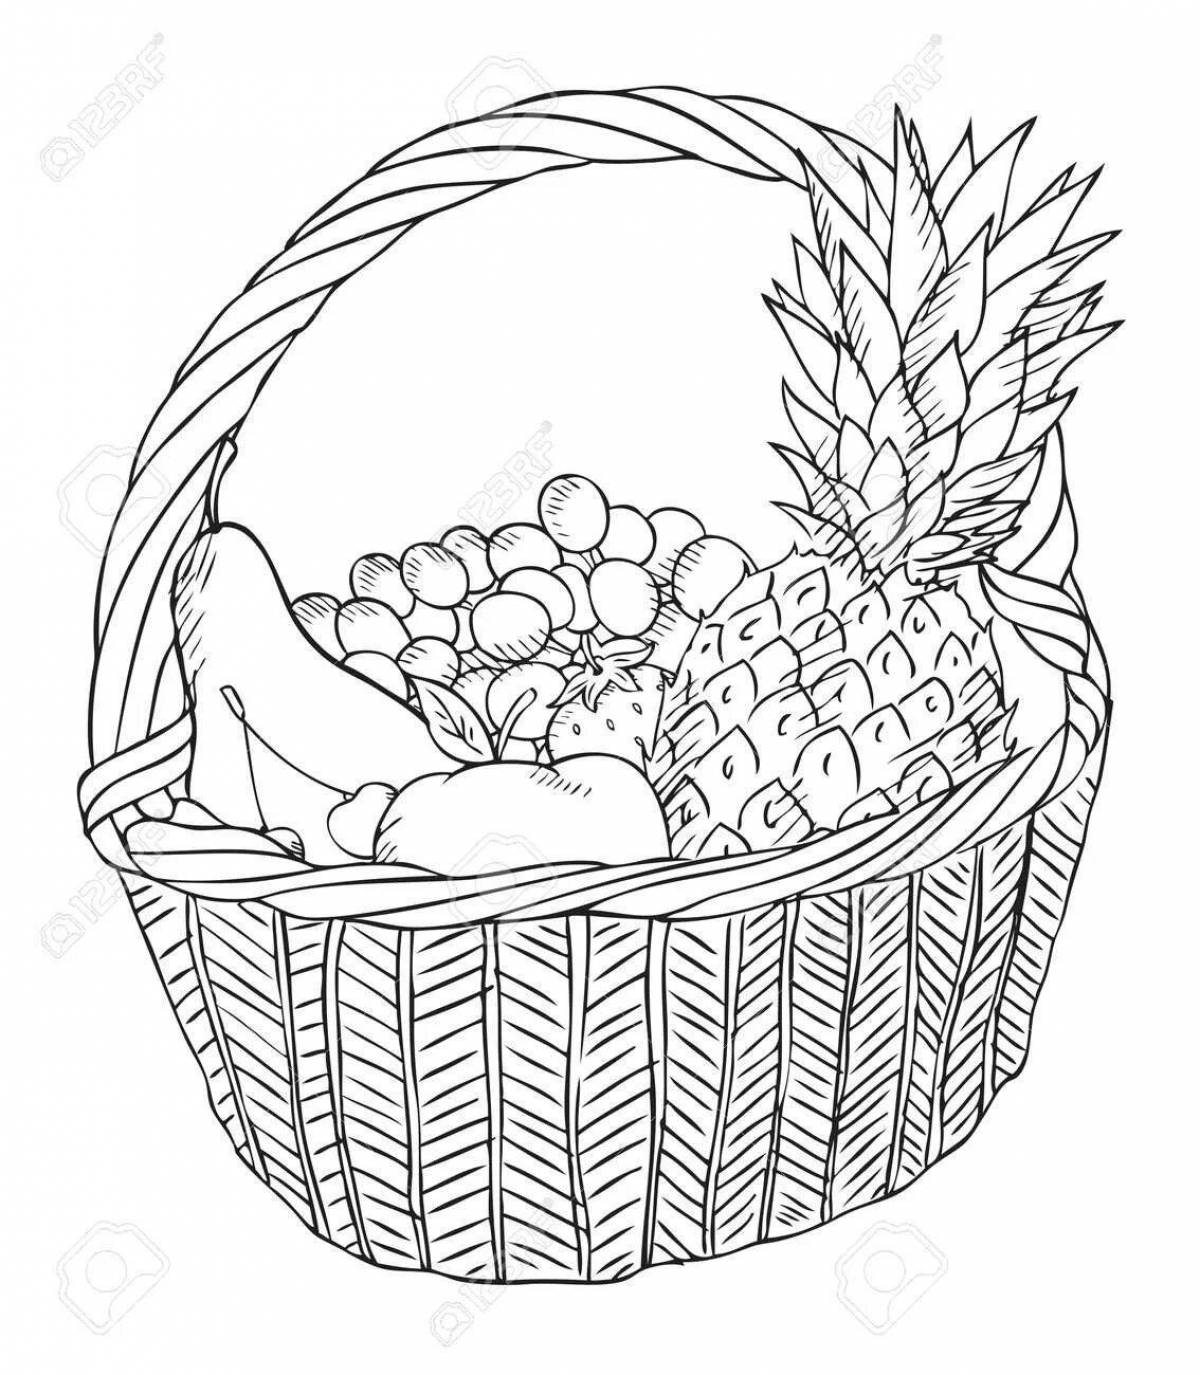 Coloring book shining grocery basket